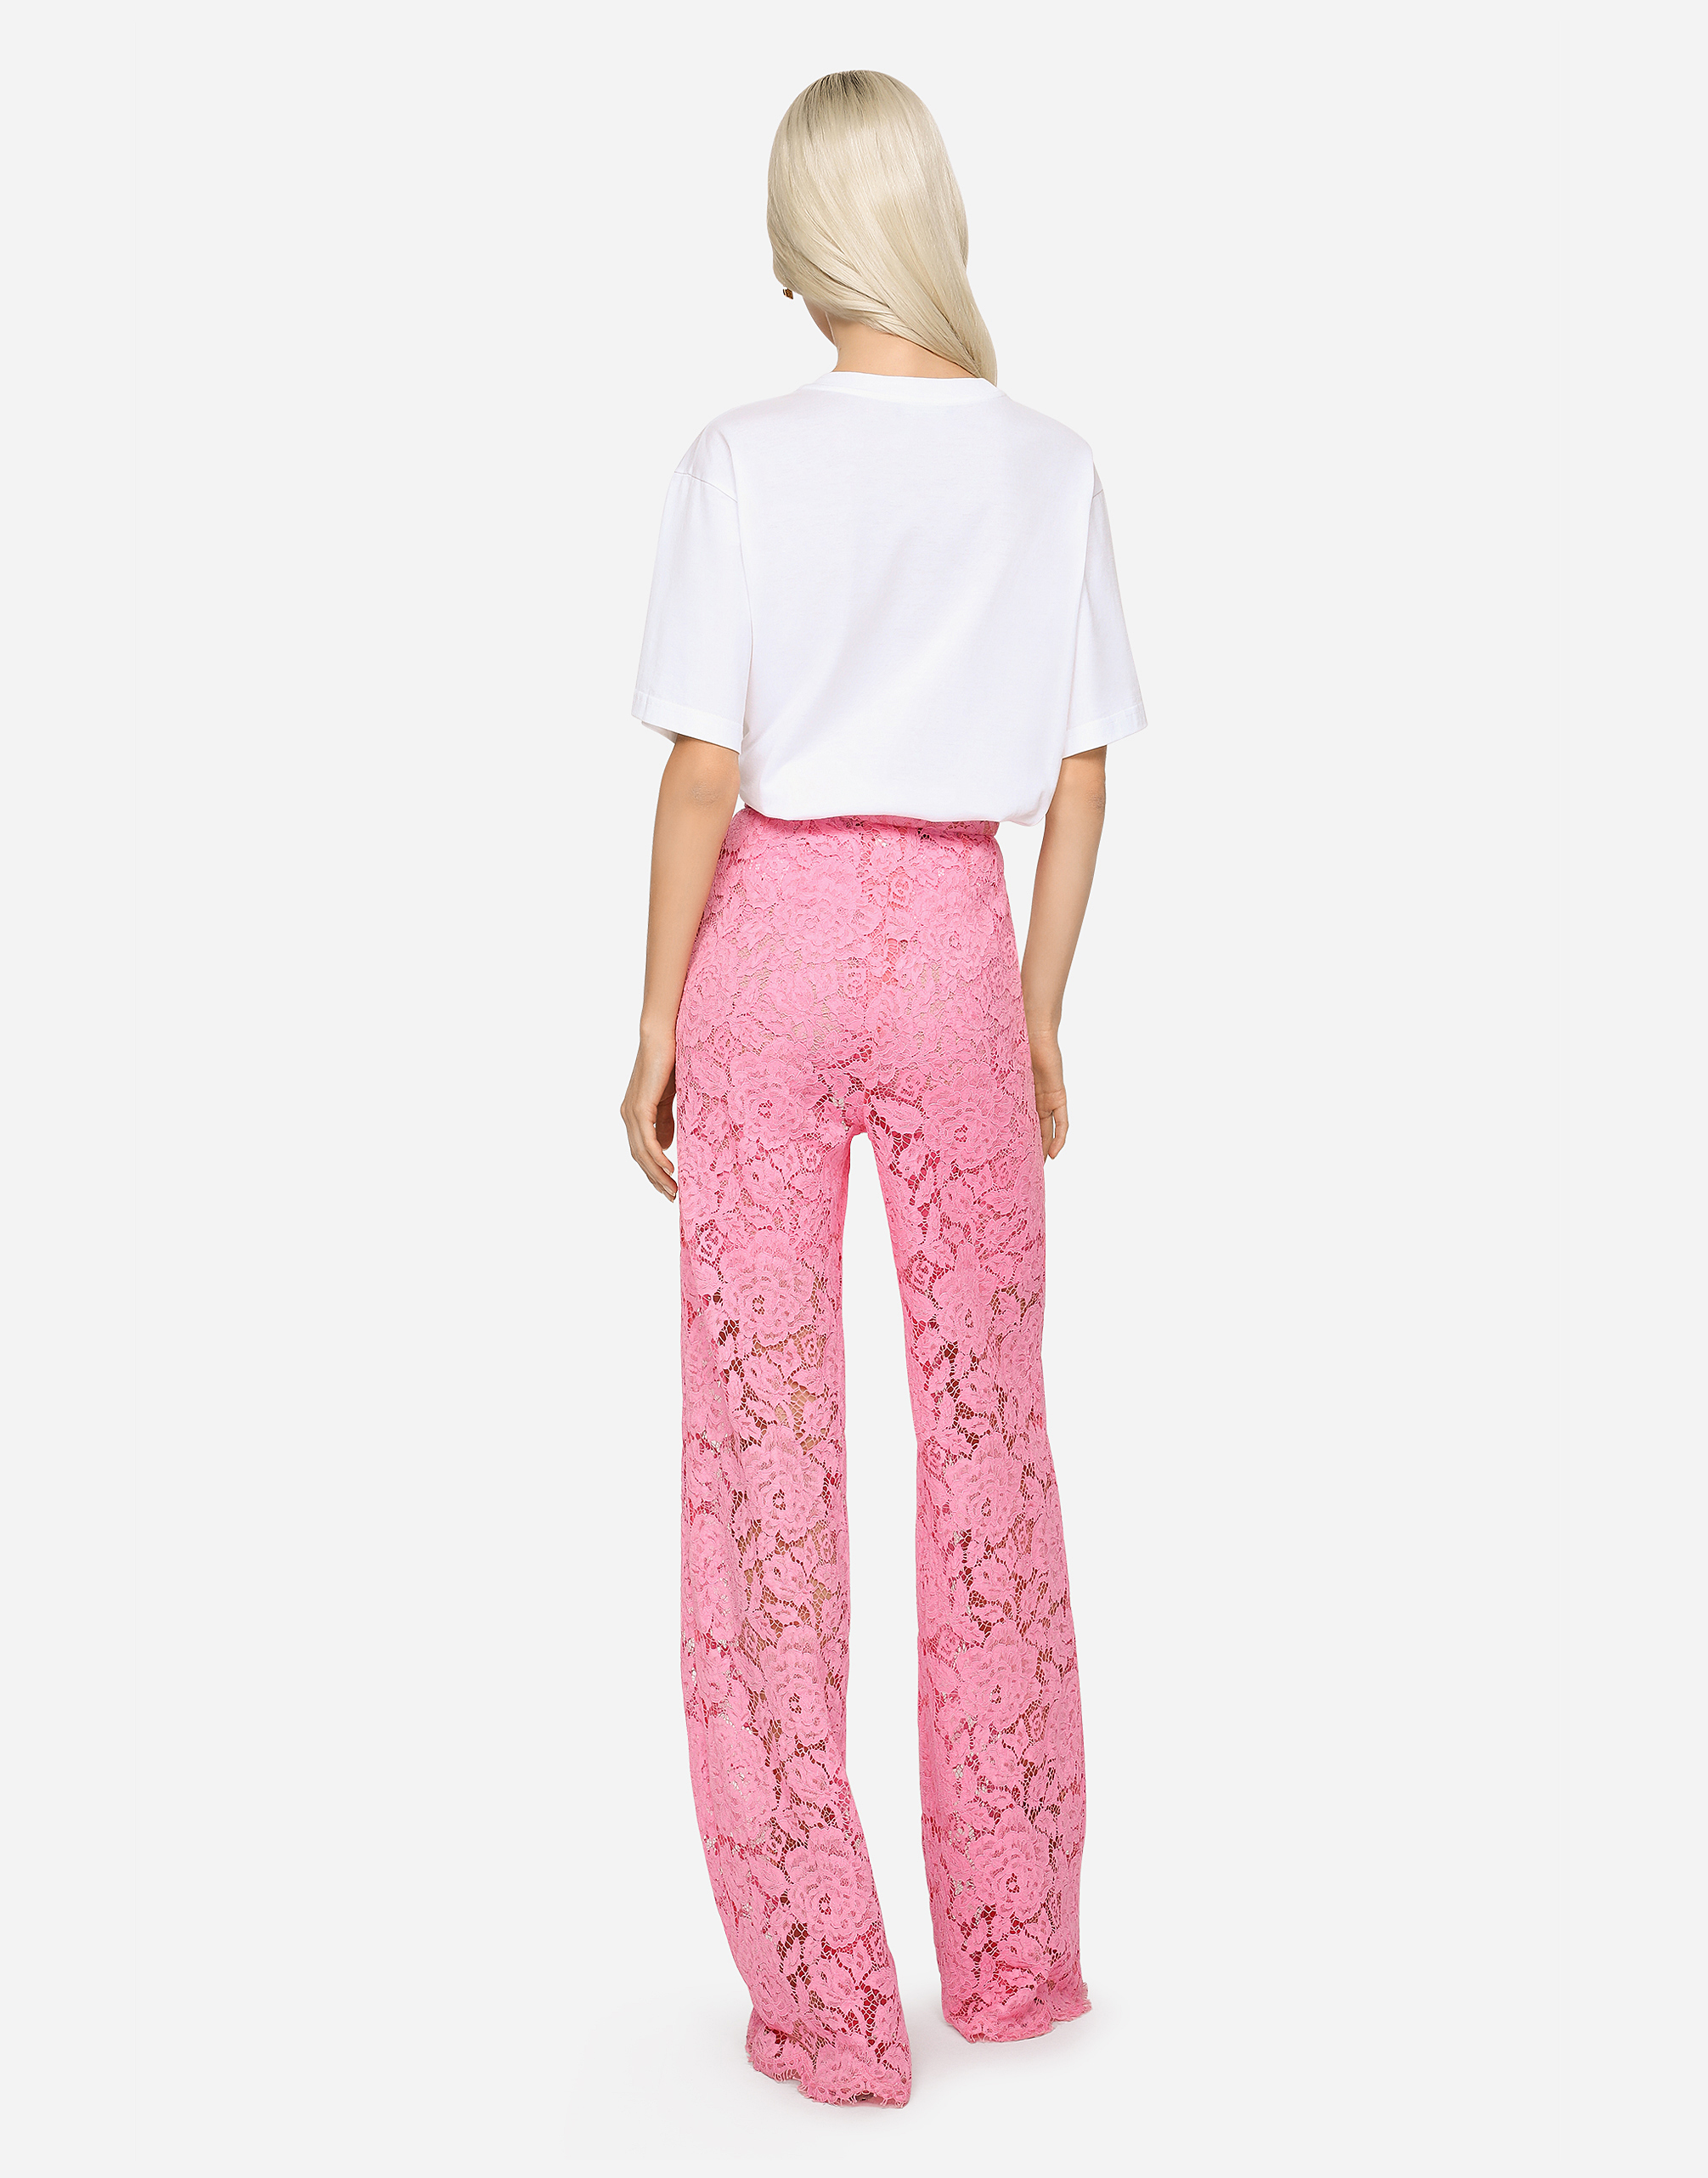 Flared branded stretch lace pants in Pink for Women | Dolce&Gabbana®